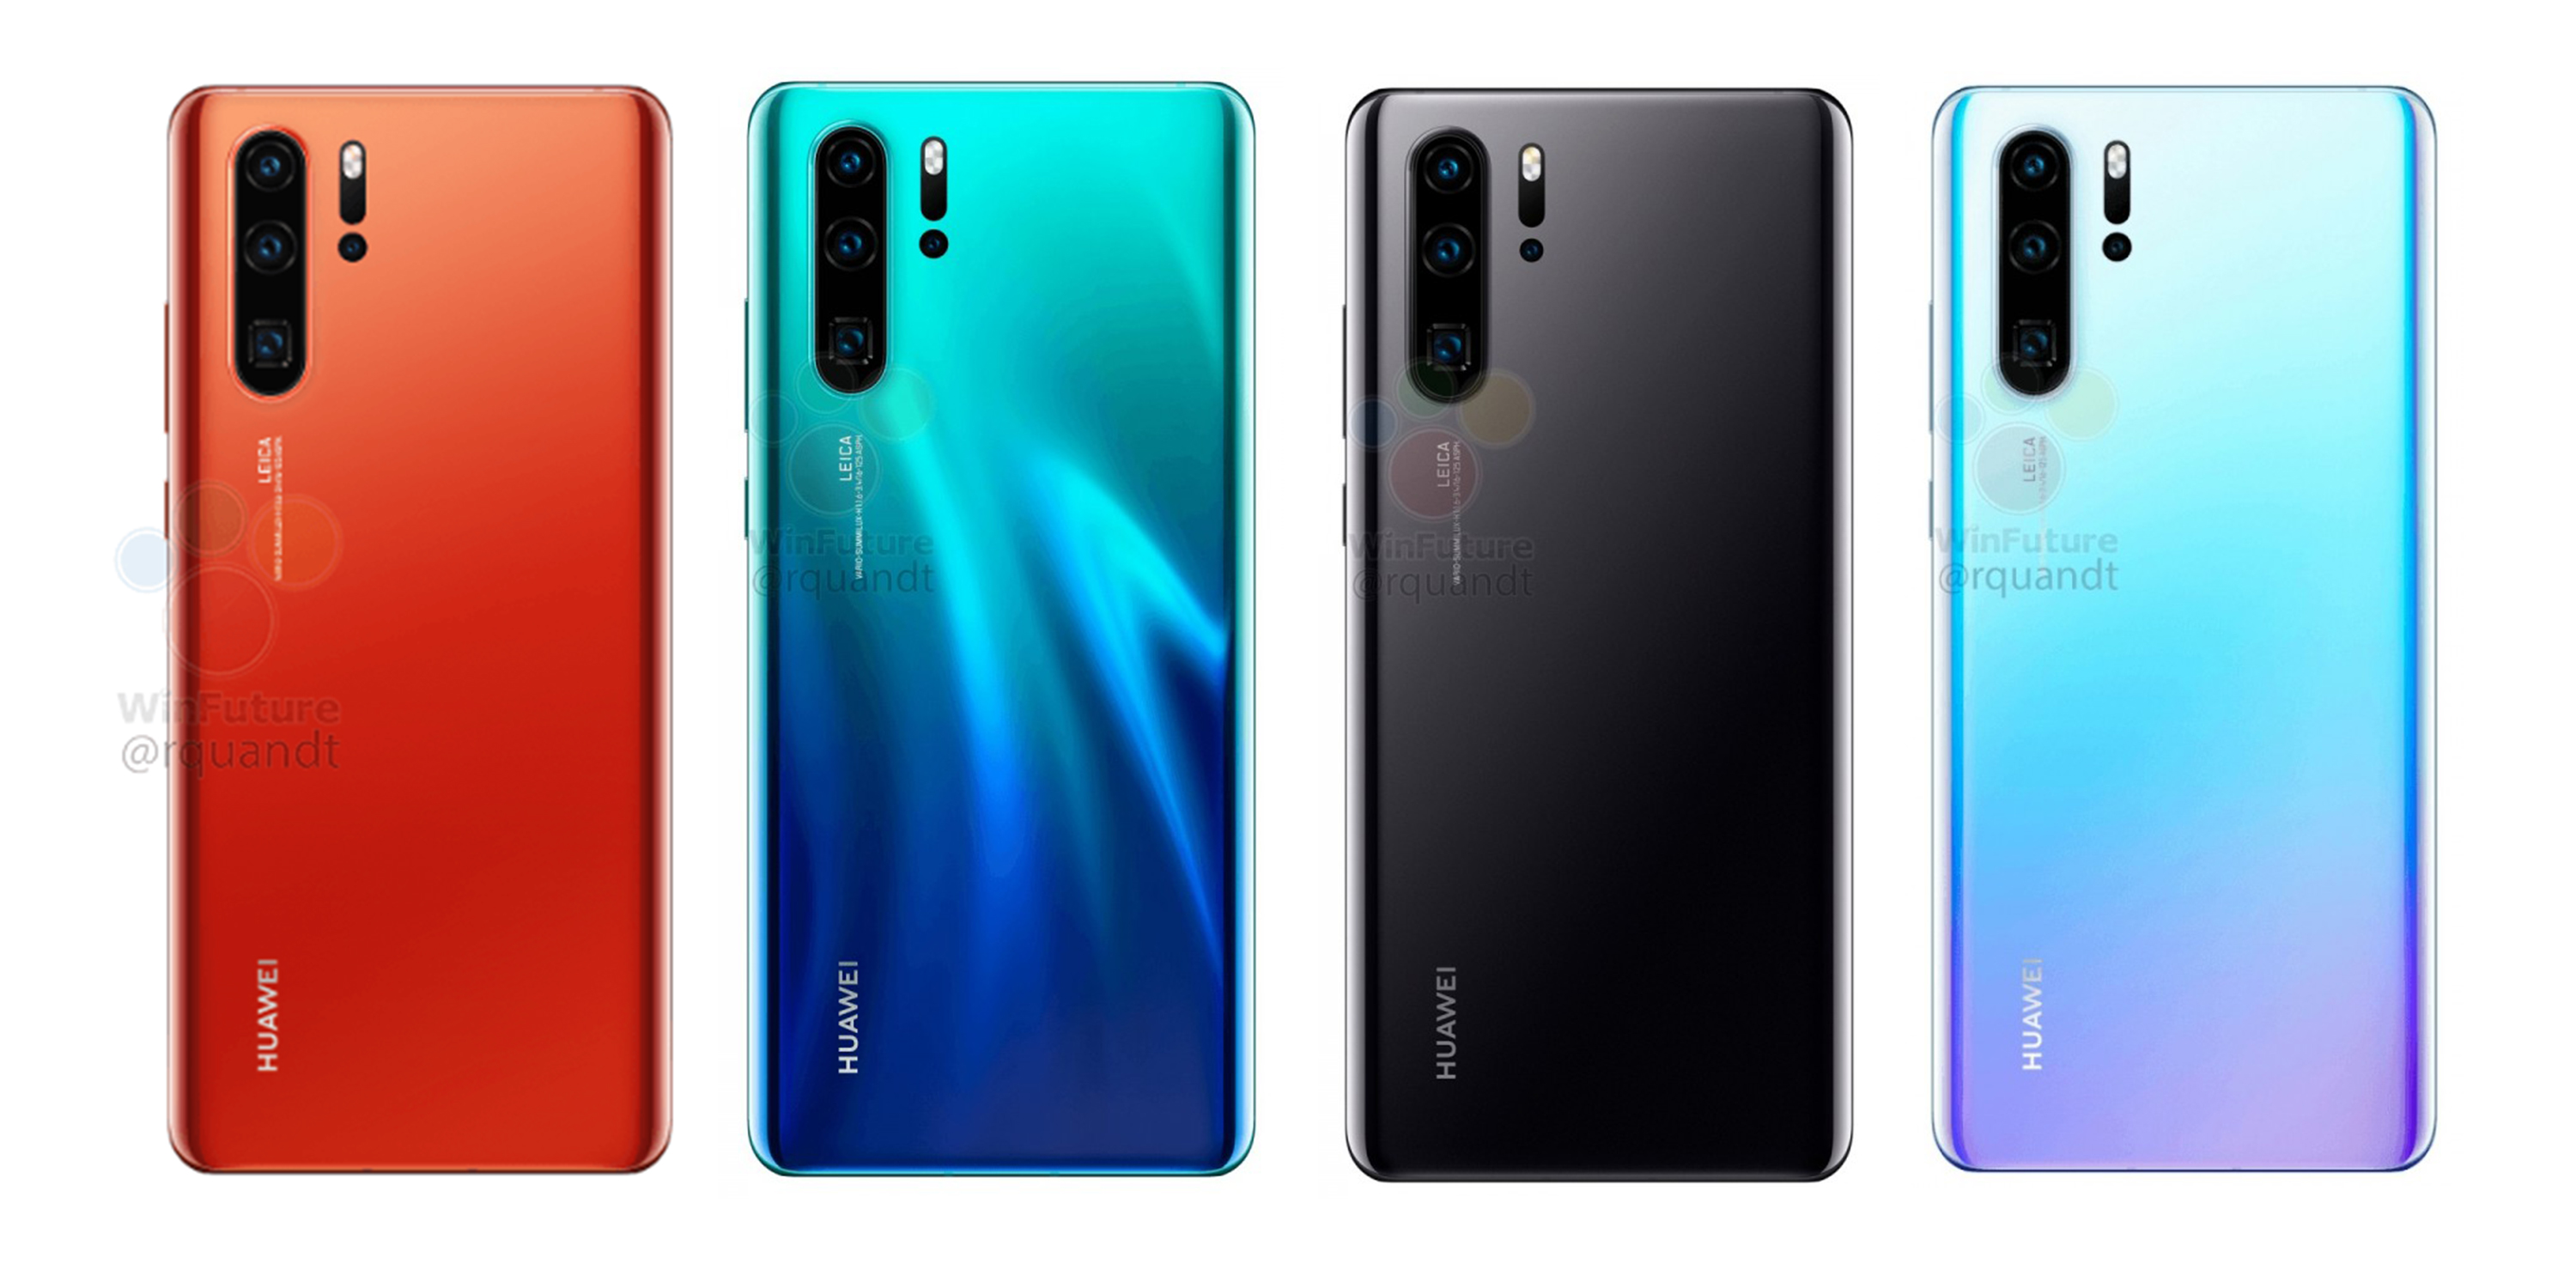 Huawei P30 and P30 Pro full specs leak giving us an even bigger picture w/ new colors - 9to5Google